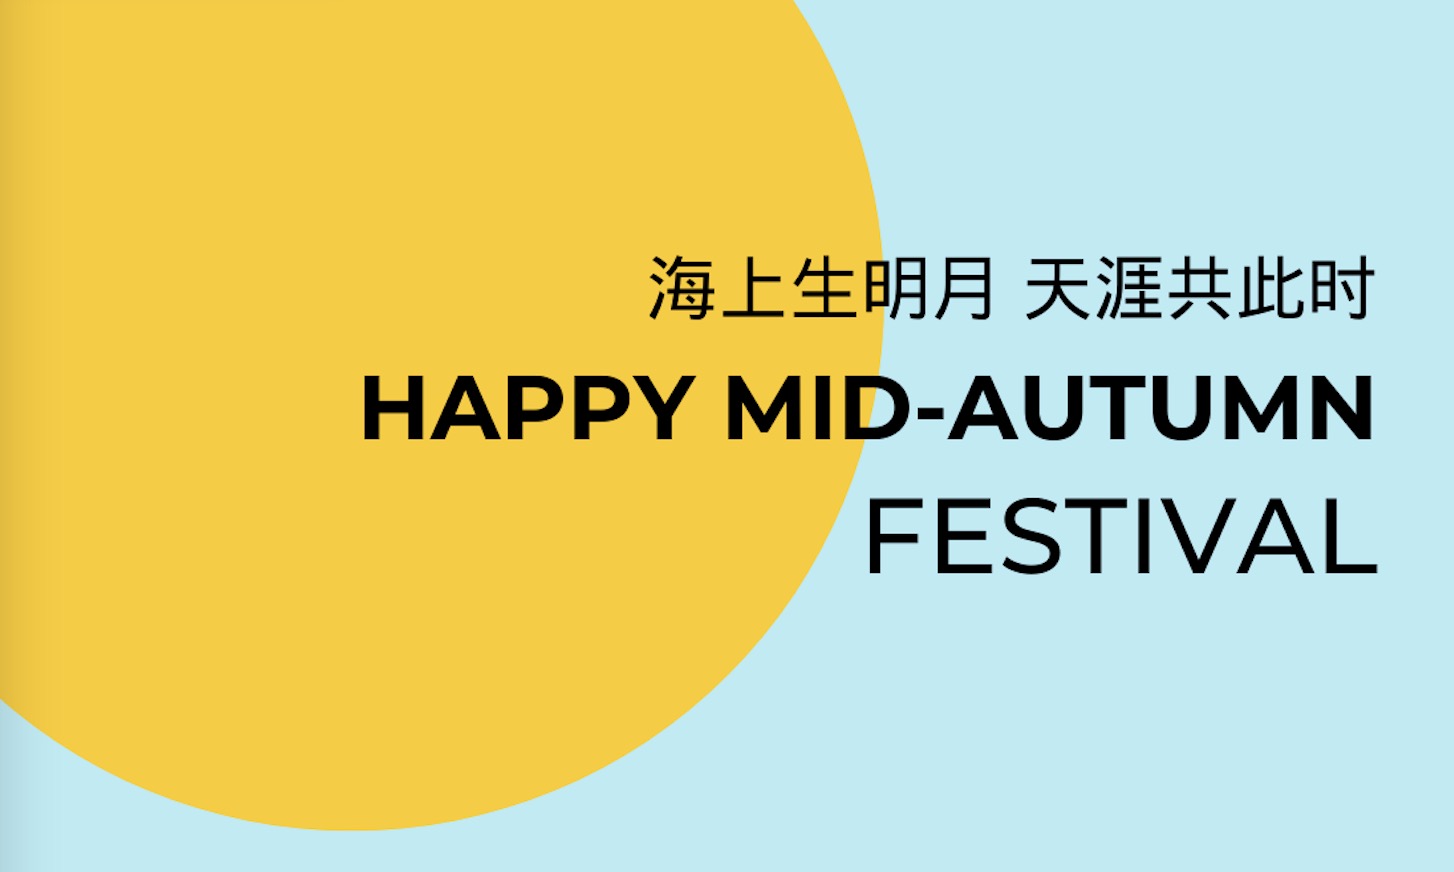 Happy Mid-Autumn Festival from NAIS Pudong - Happy Mid-Autumn Festival from NAIS Pudong